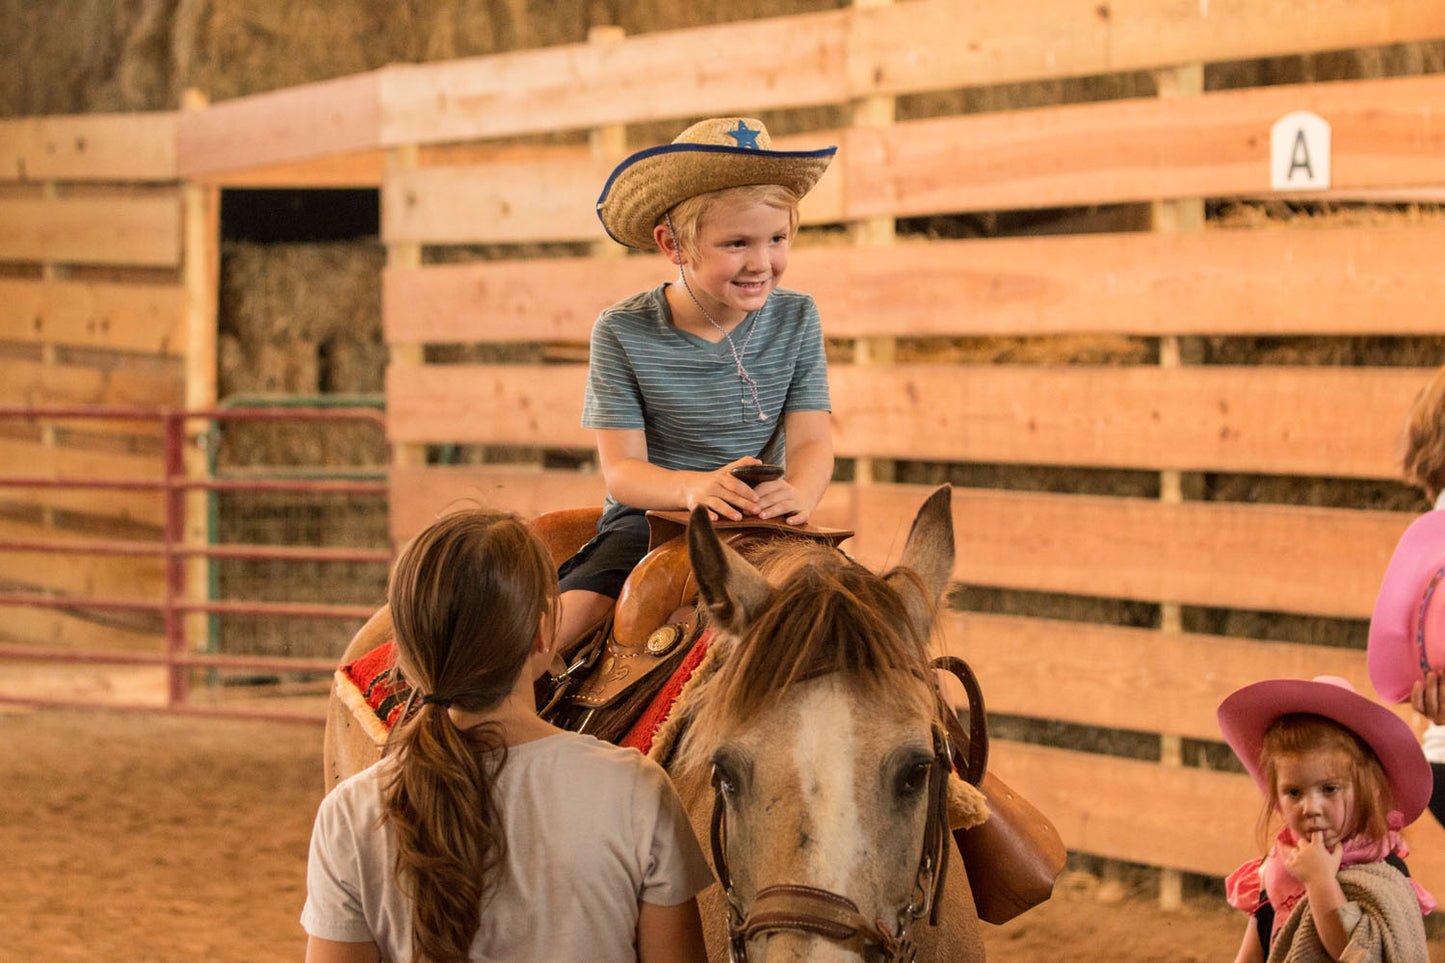 Pony Ride Gift Certificate